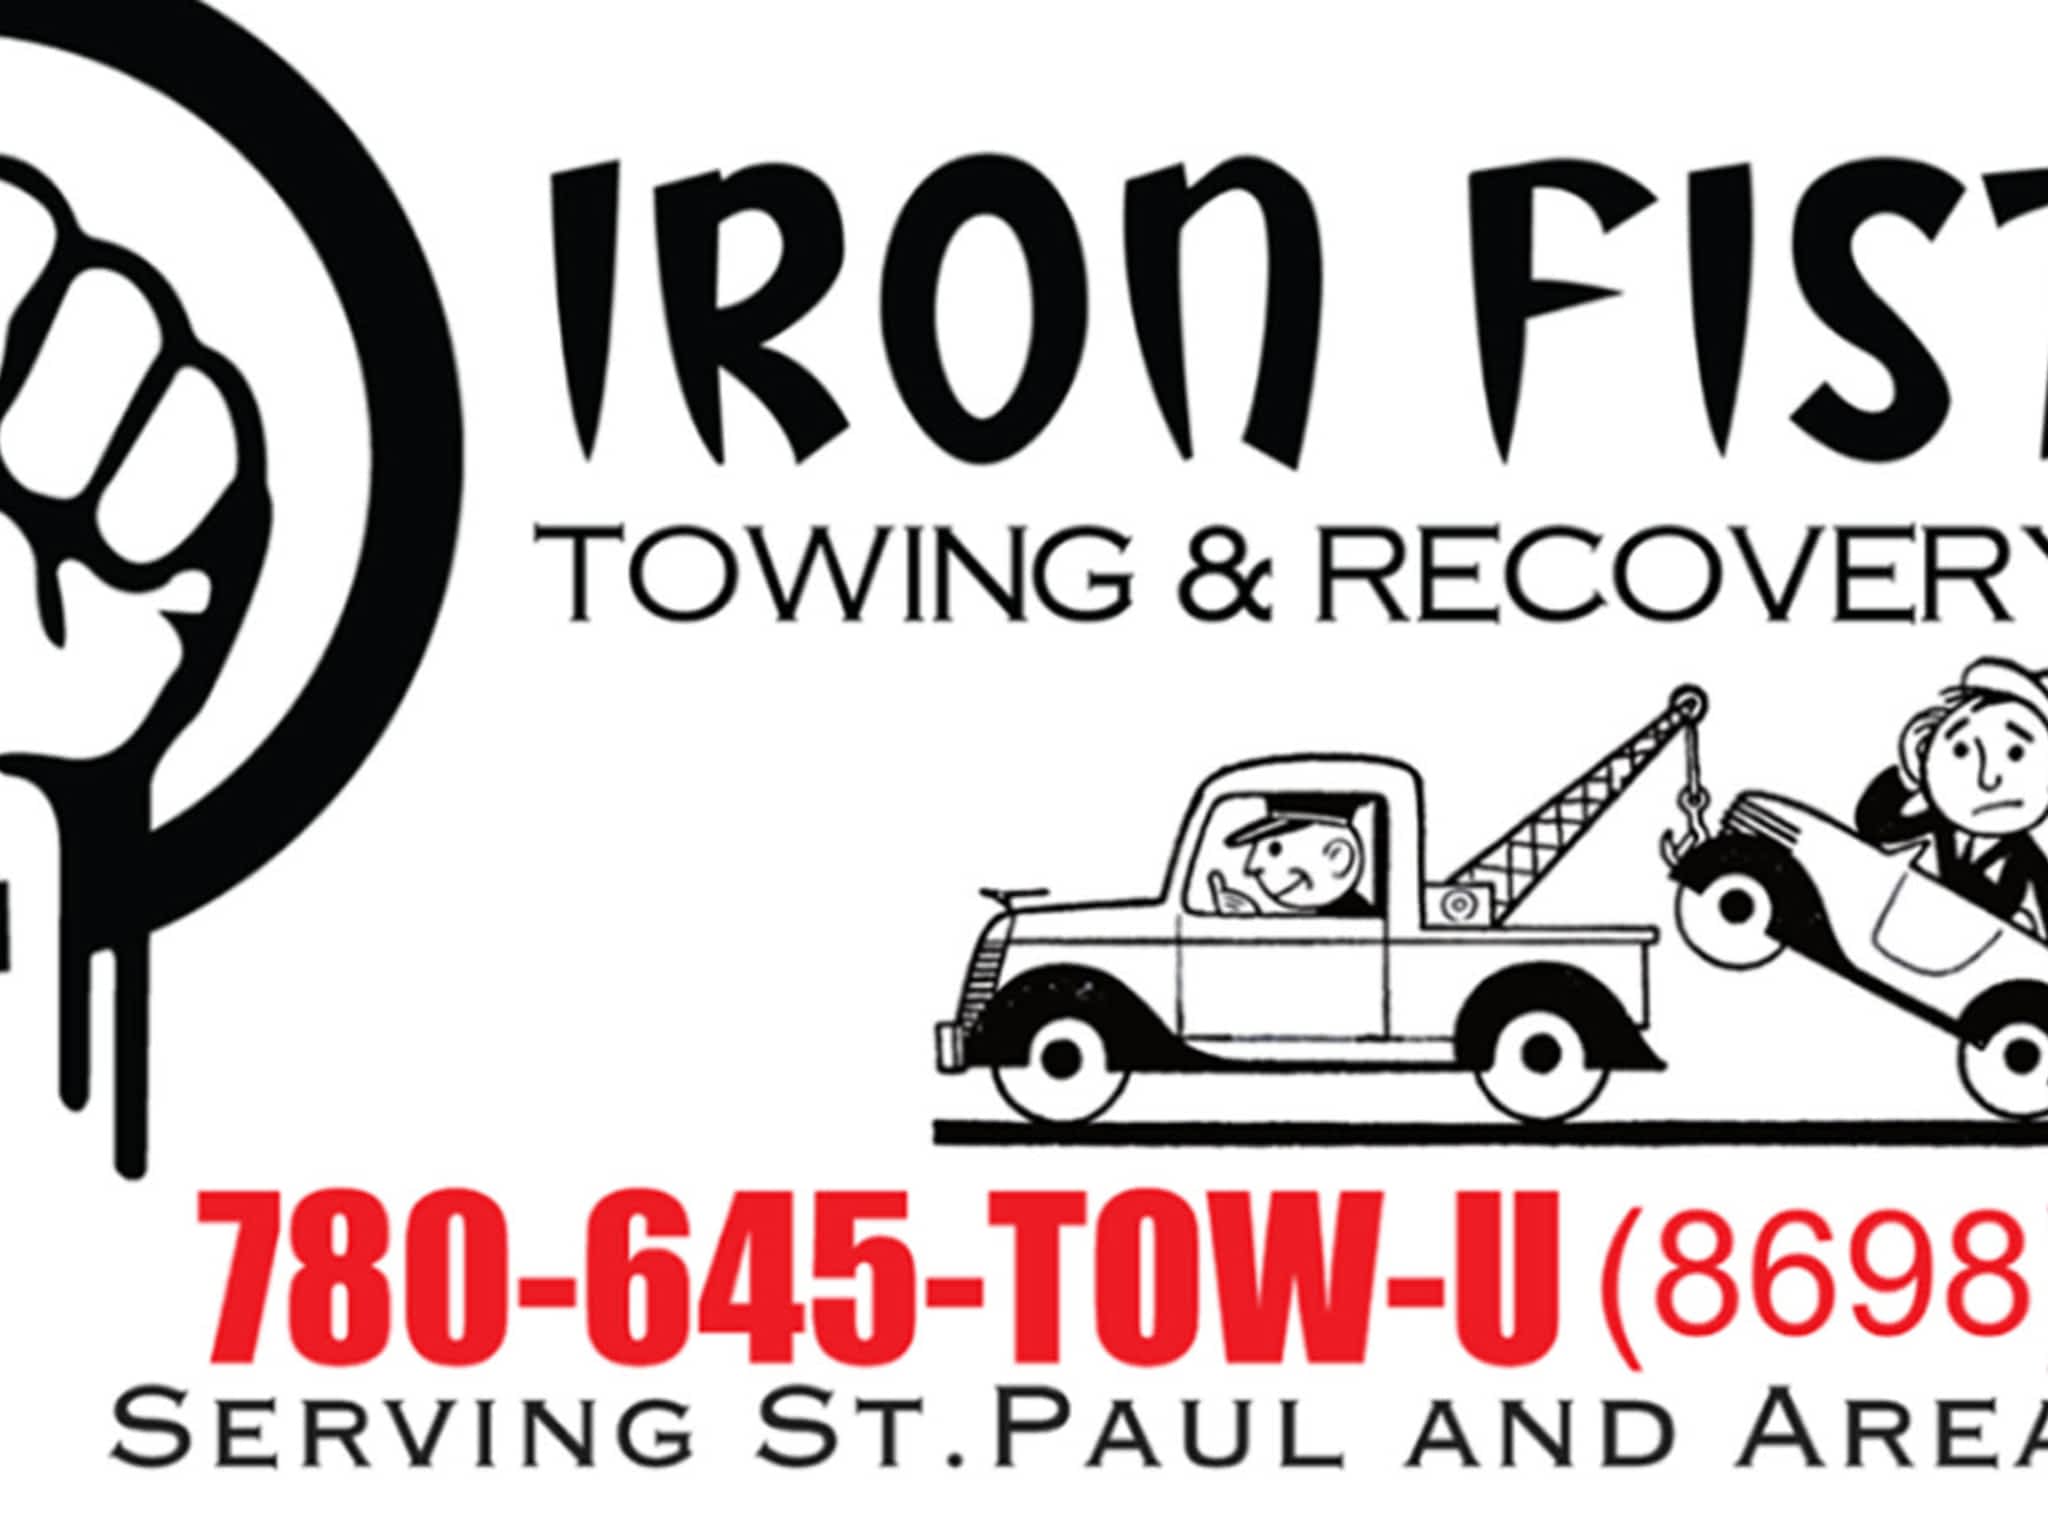 photo Iron Fist Towing & Recovery Inc